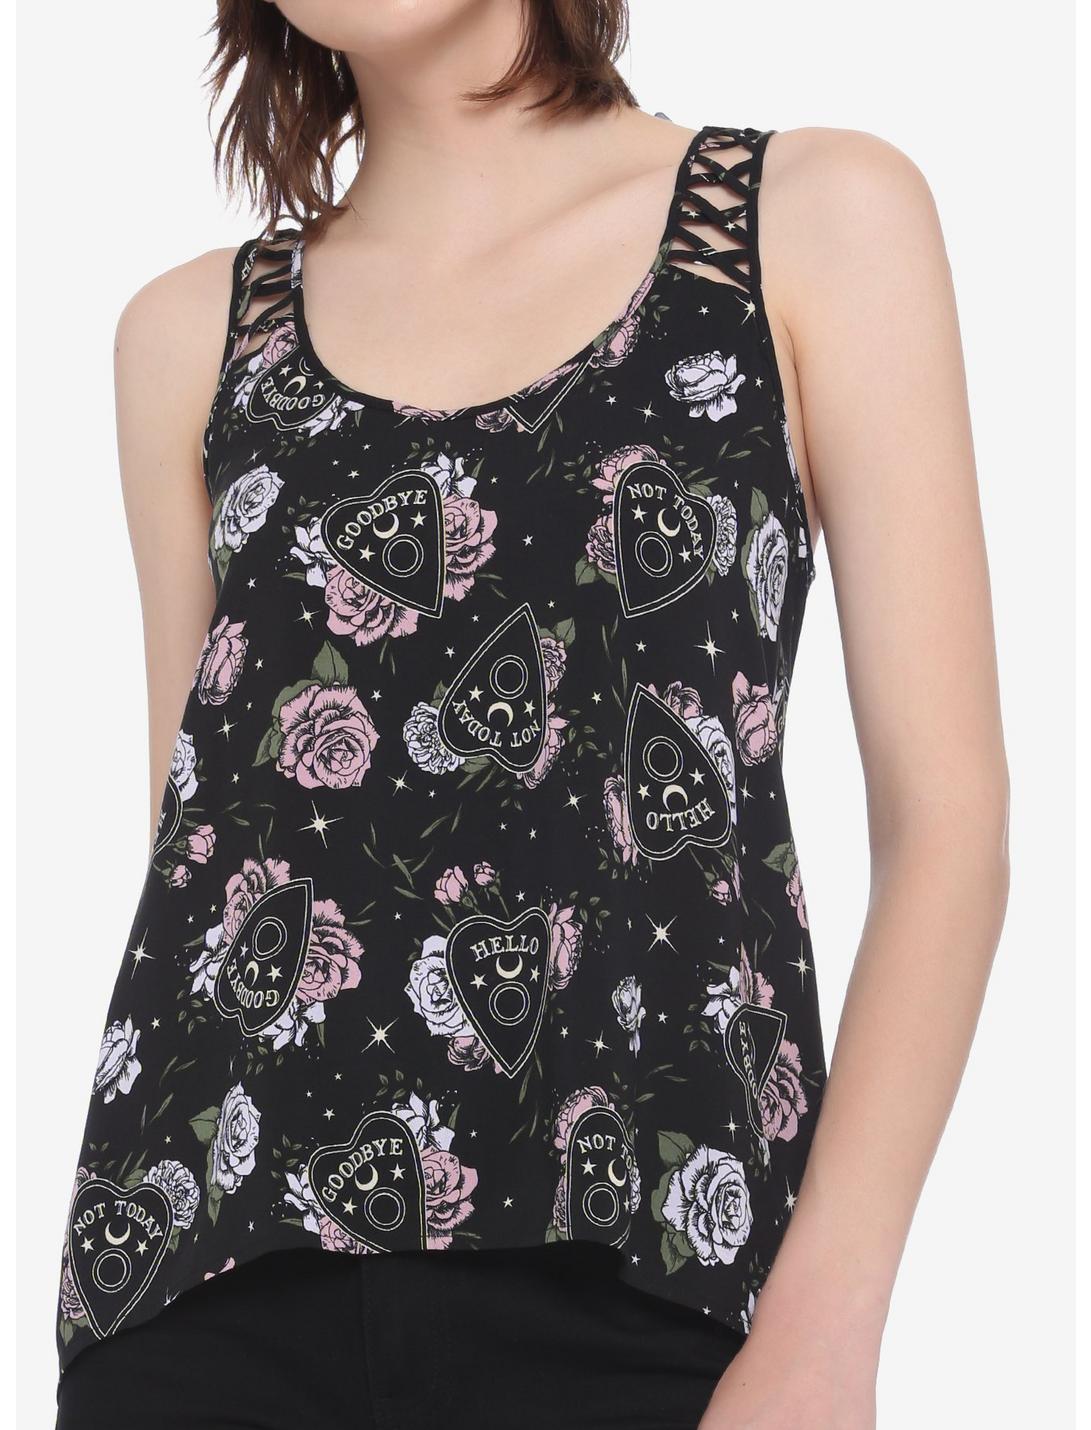 Floral Planchette Strappy Back Girls Woven Tank Top, BLACK, hi-res